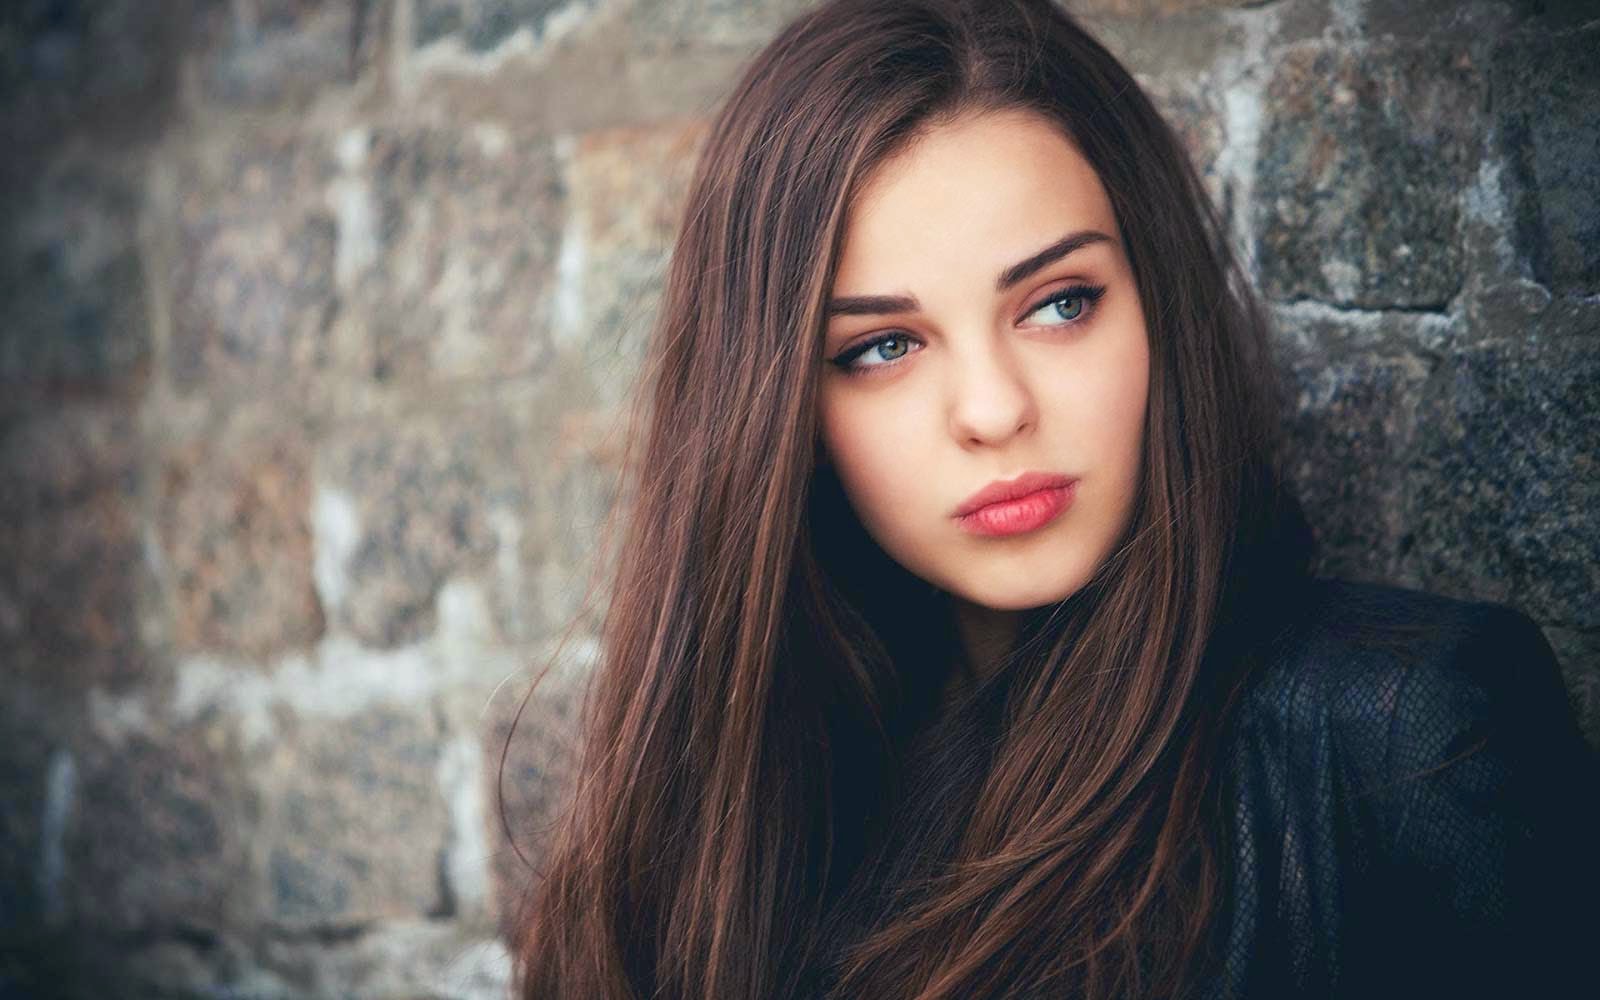 Cute Girl with Simple Makeup Image